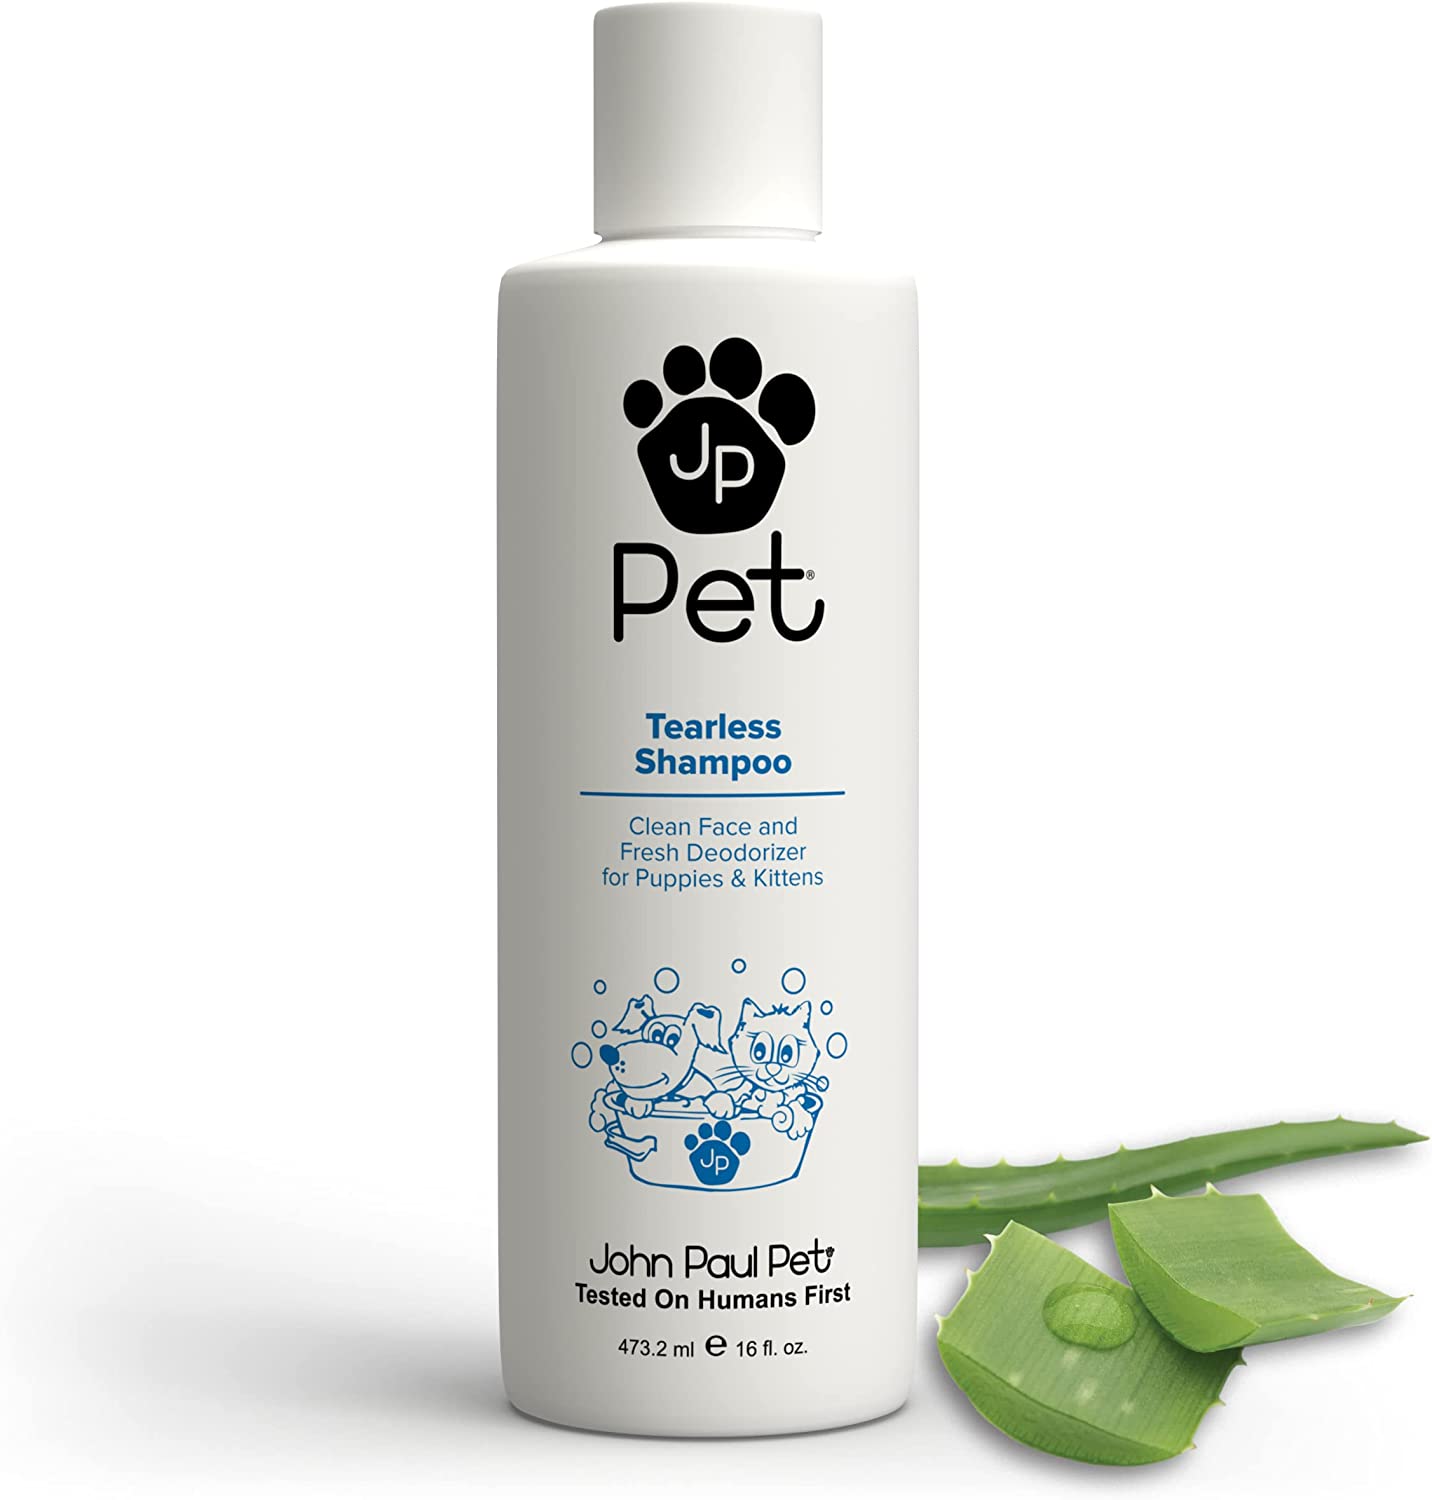 John Paul Pet Tearless Odor Absorbing Shampoo, Clean and Fresh Low PH Formula for Puppies, Dogs, Kittens and Cats, 16-Ounce, Clear